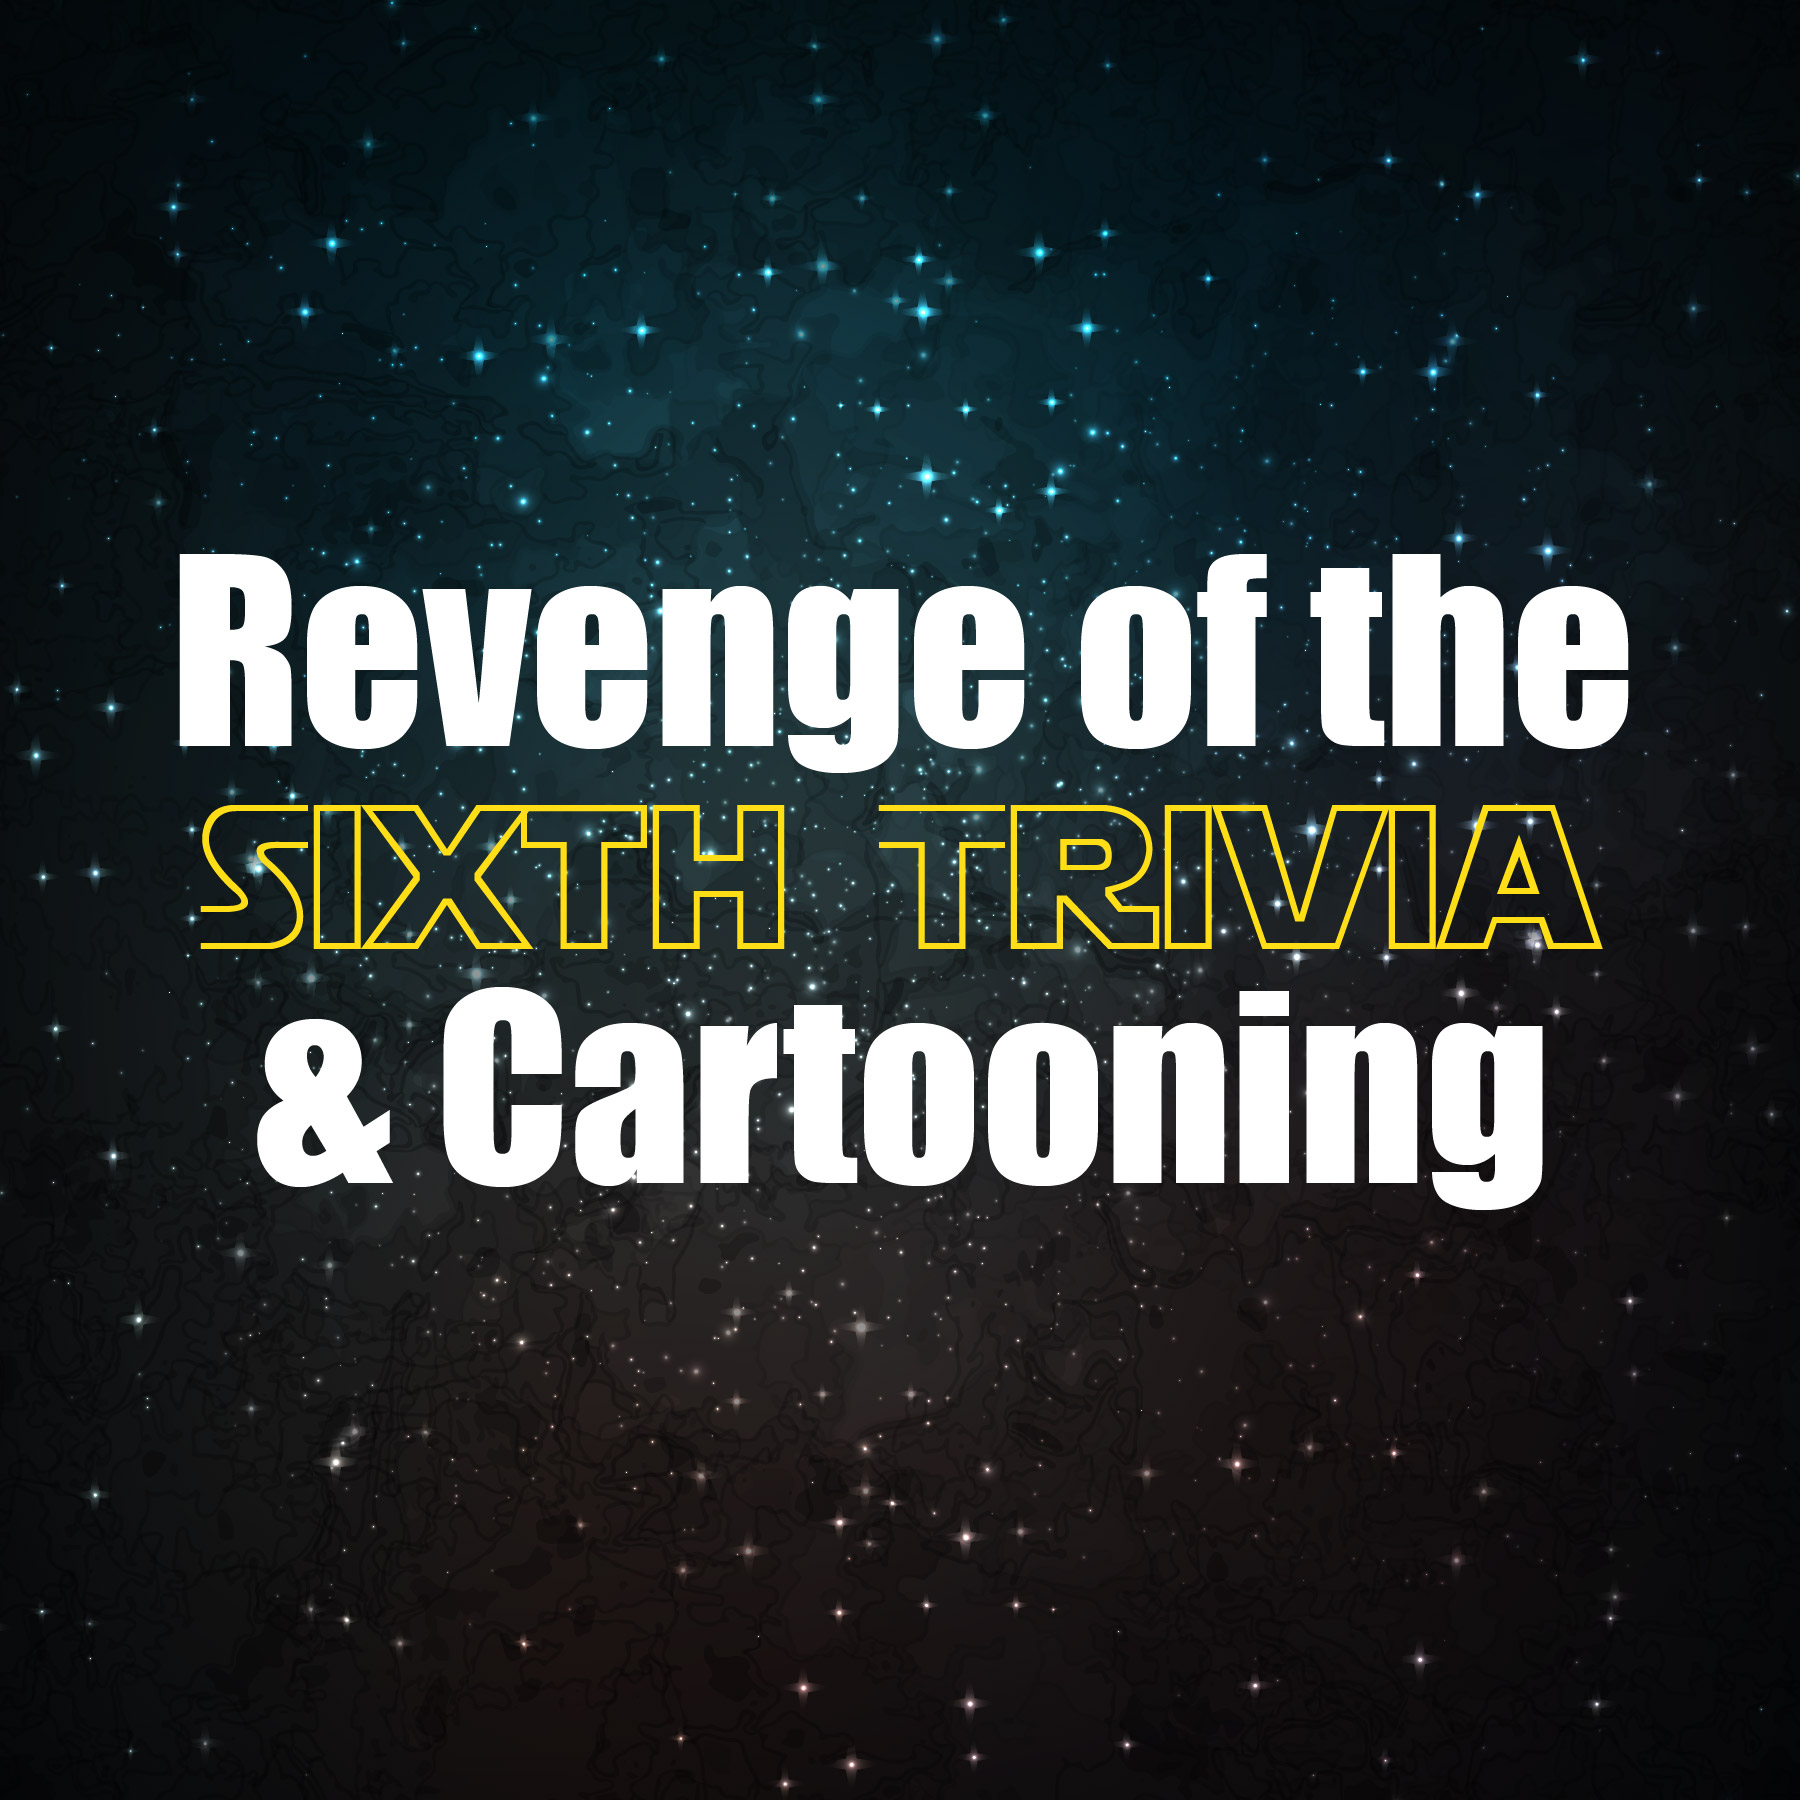 "Revenge of the Sixth Trivia and Cartooning" text on space background